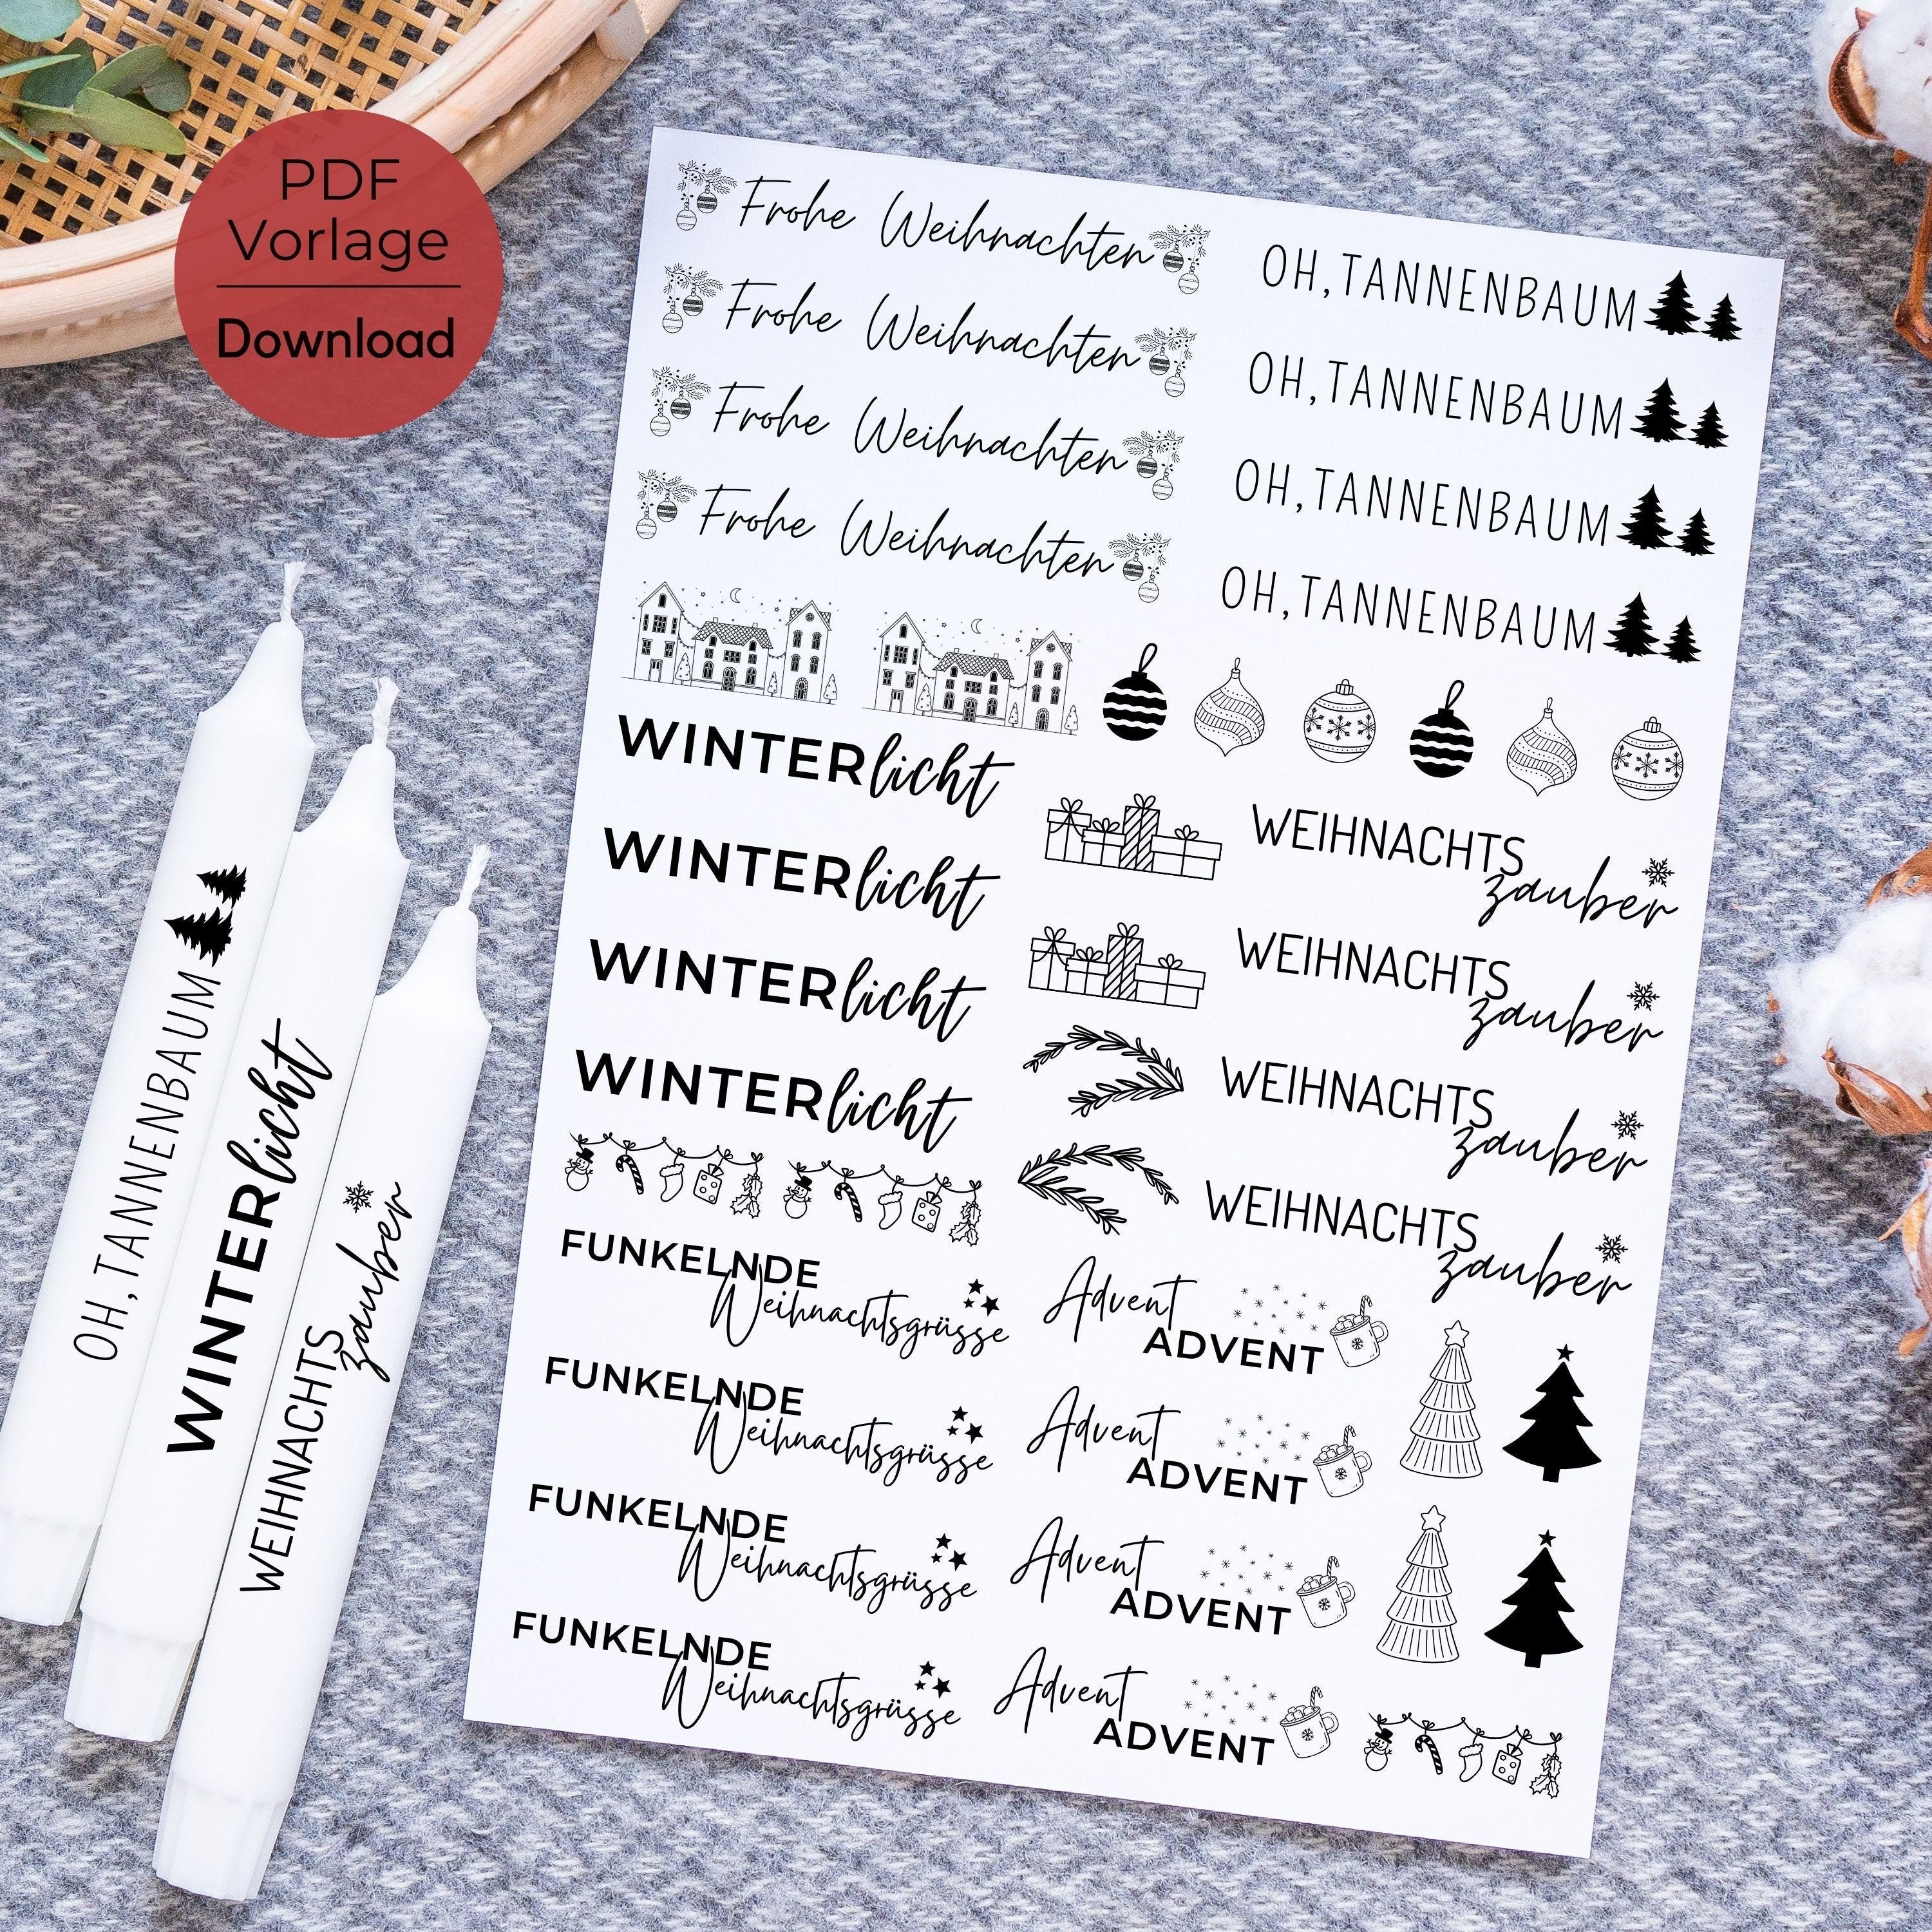 Christmas candle tattoo PDF template candle stickers design candles Advent Merry Christmas Oh Christmas tree winter light